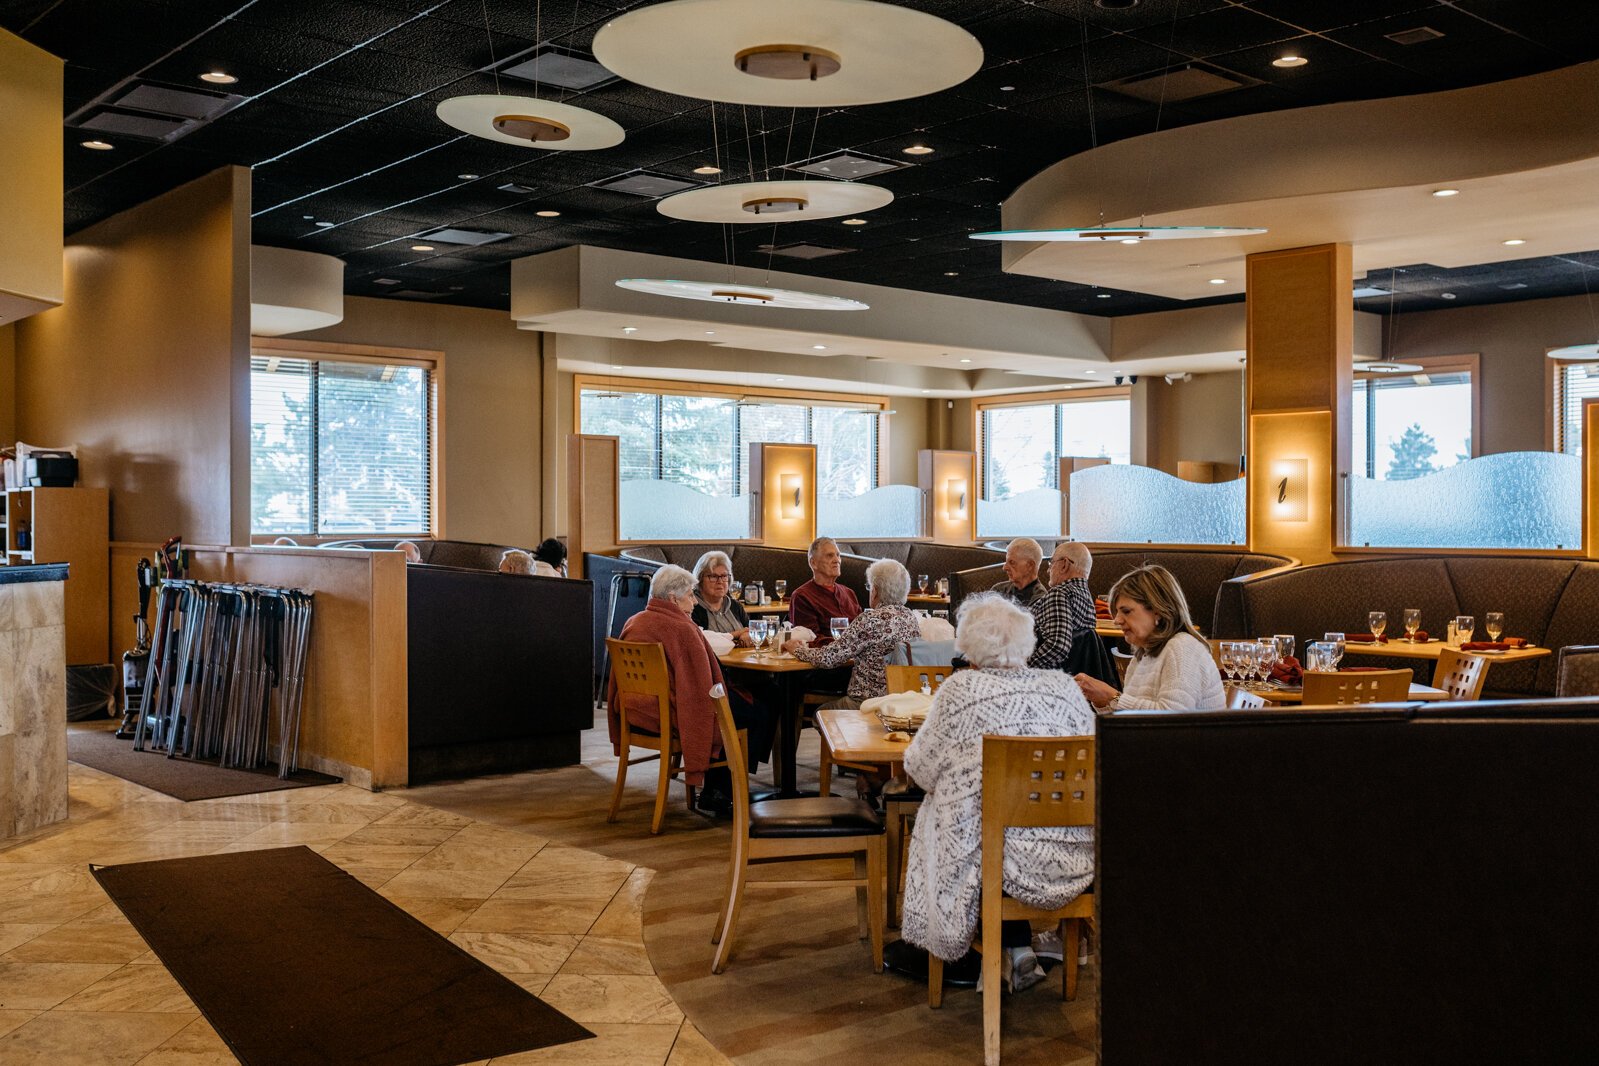 The more formal atmosphere makes Ike's Restaurant a great place for family gatherings or larger events.